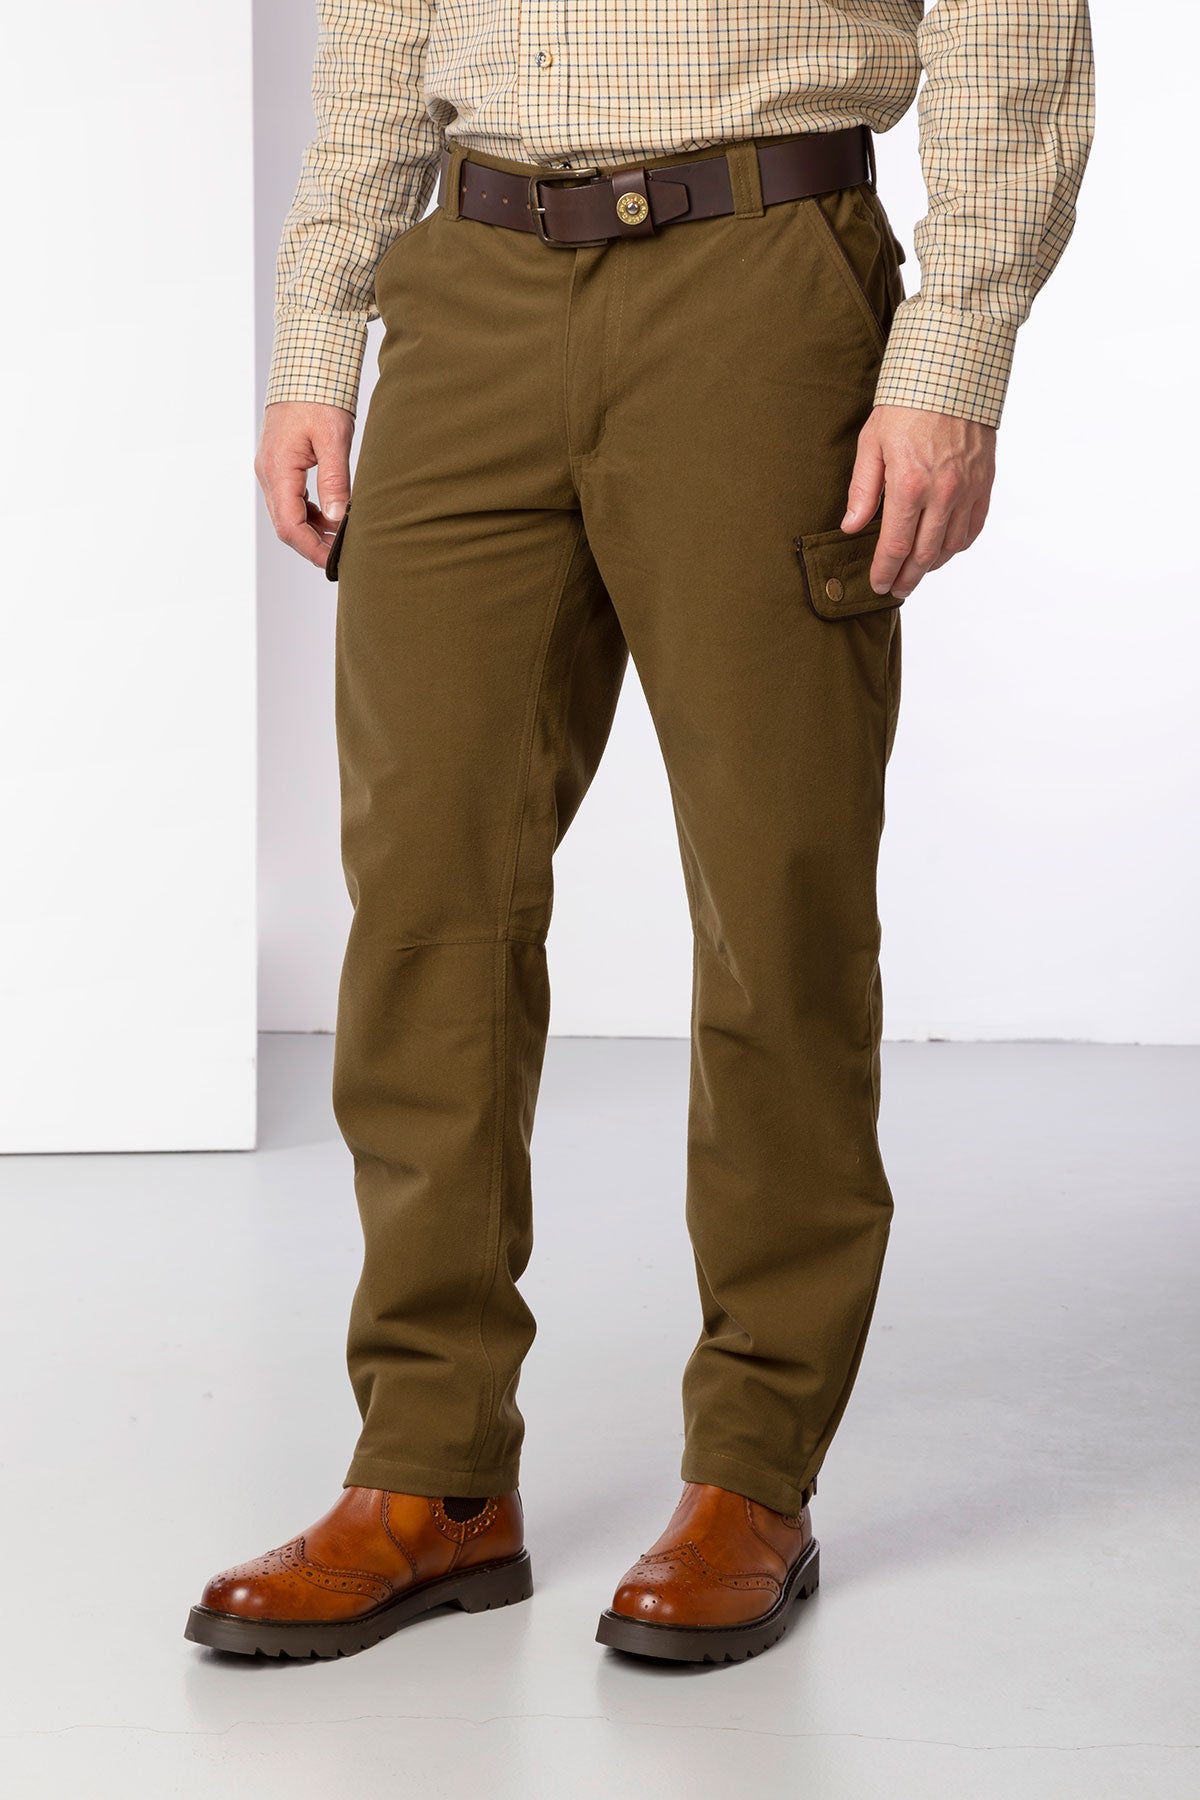 Hunting Leather Pants Trousers  German Wear Shop